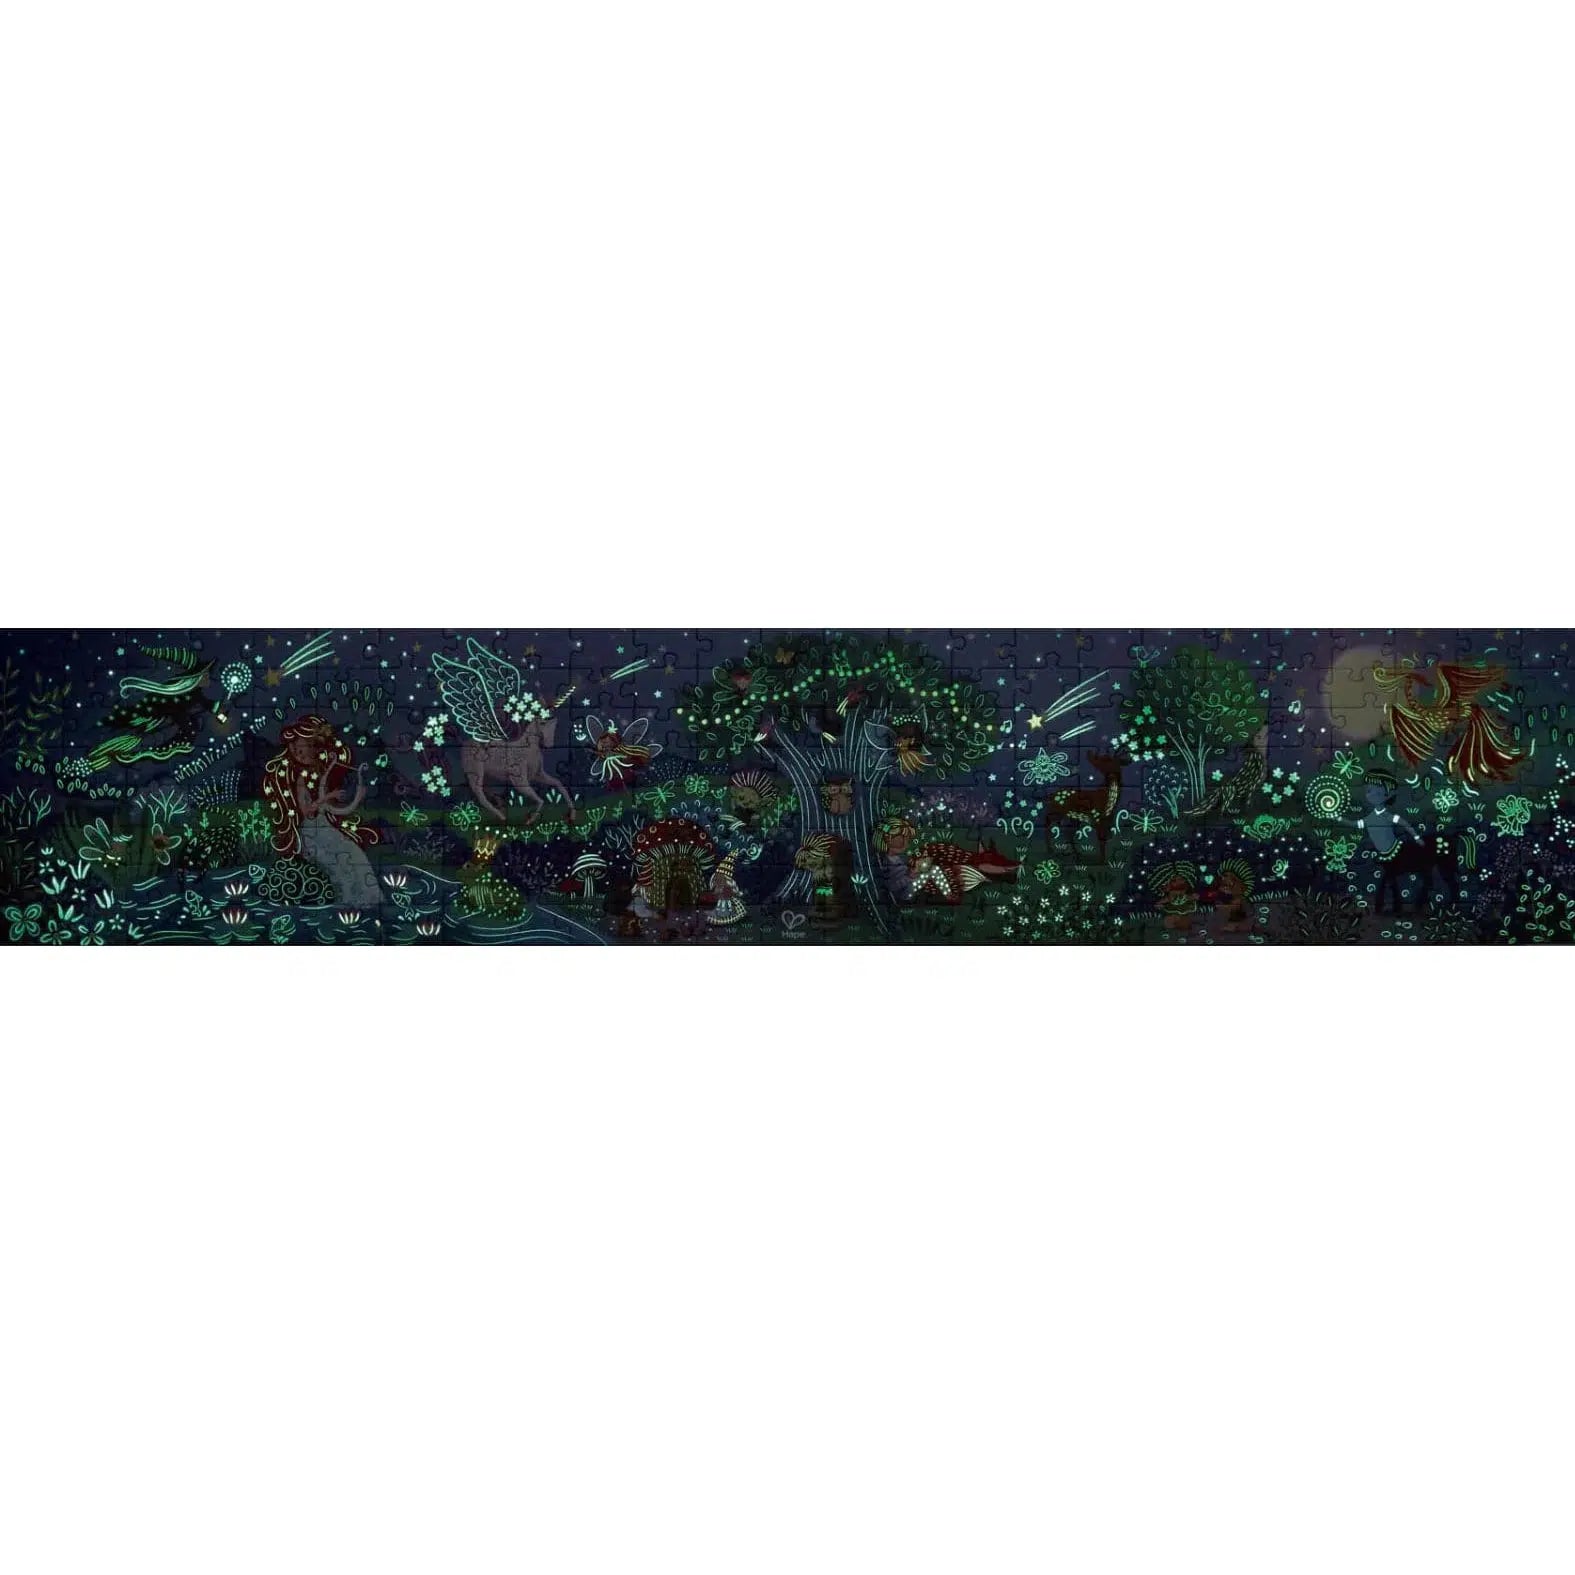 Hape Dinosaurs Puzzle 1.5 Meter Long | 200 Pieces Colorful Giant  Glow-in-The-Dark Jigsaw for Children 6+ Years